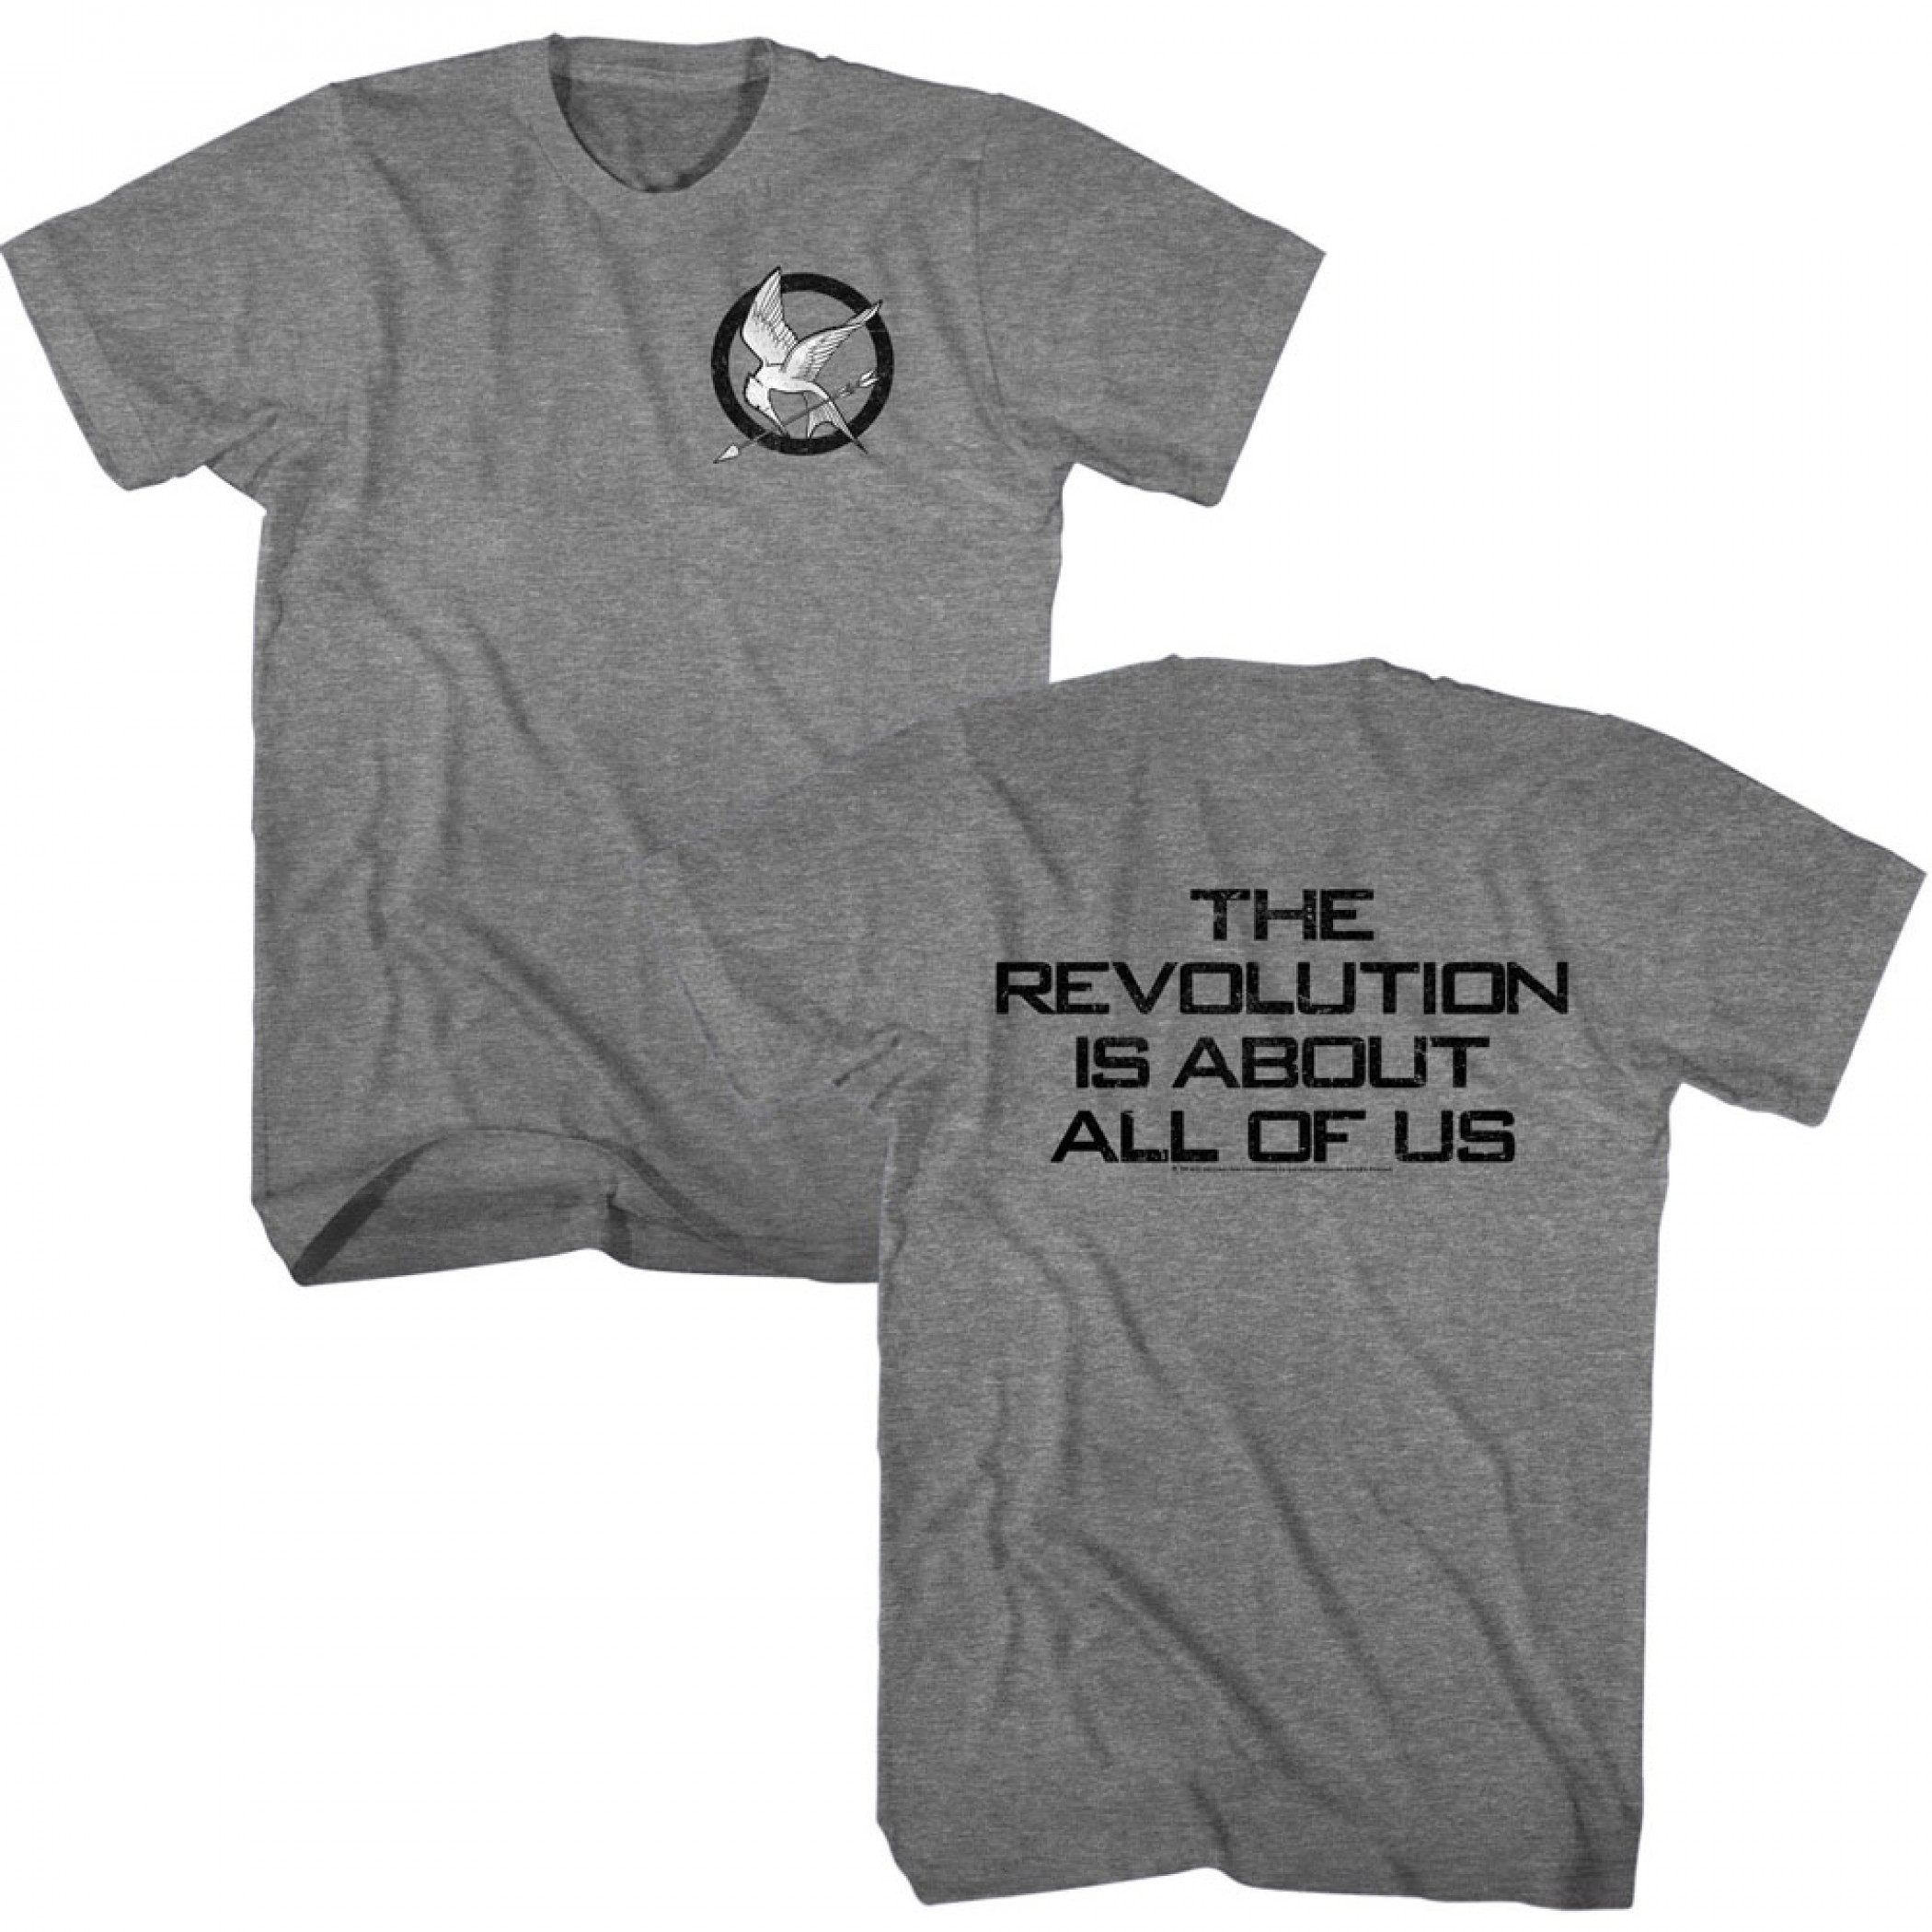 The Hunger Games The Revolution is About All of Us T-Shirt